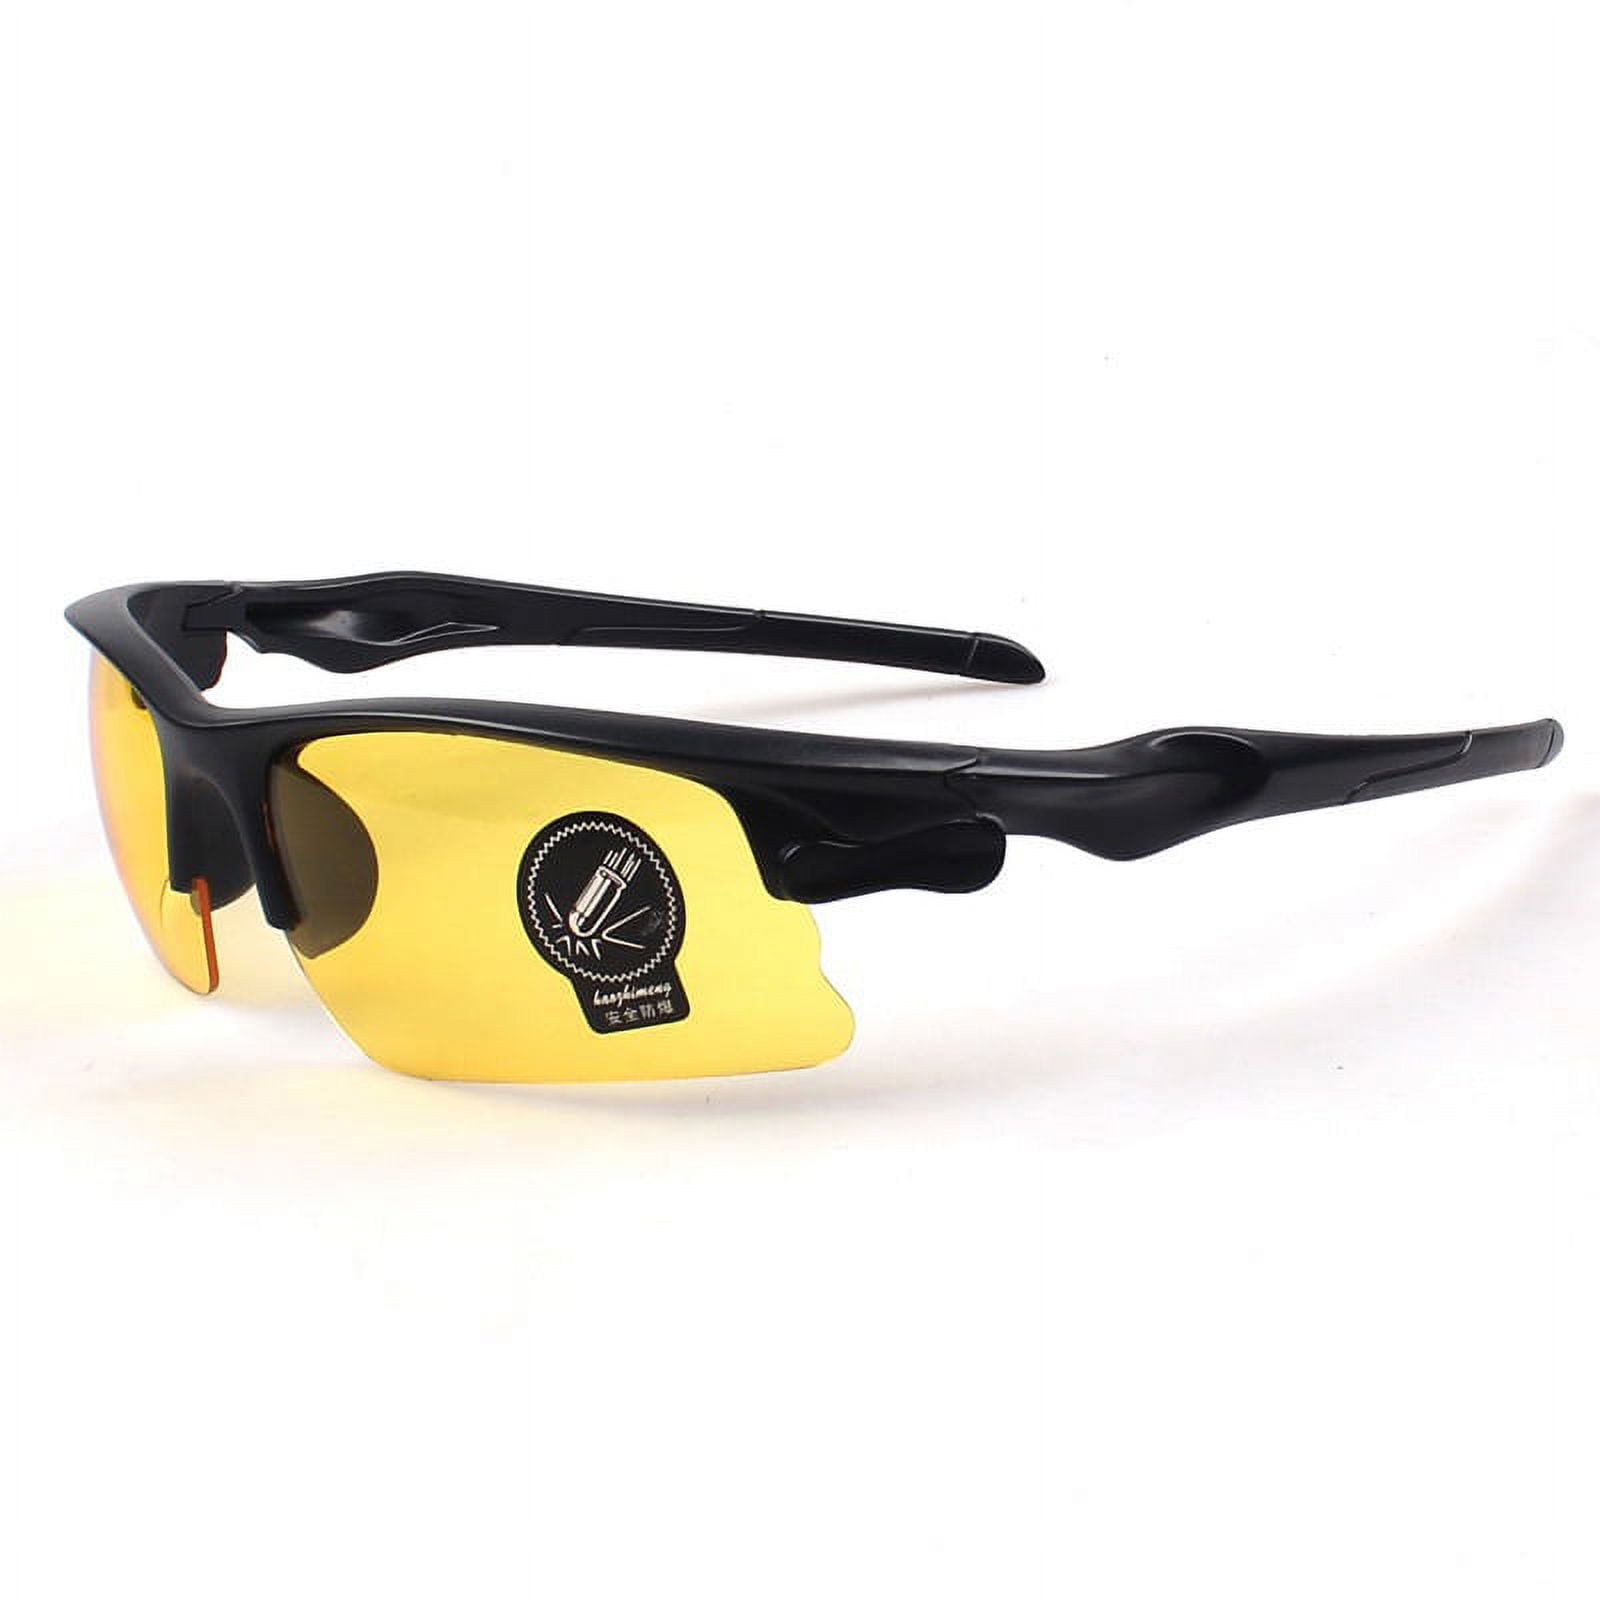 Outdoor Cycling Glasses Sunglasses Sunglasses 3106 Yellow Lenses Men  Driving Polarized Sunglasses Keep Your Eyes From Wind & Dust Large Pc Frame  Night Vision Sunglasses New 